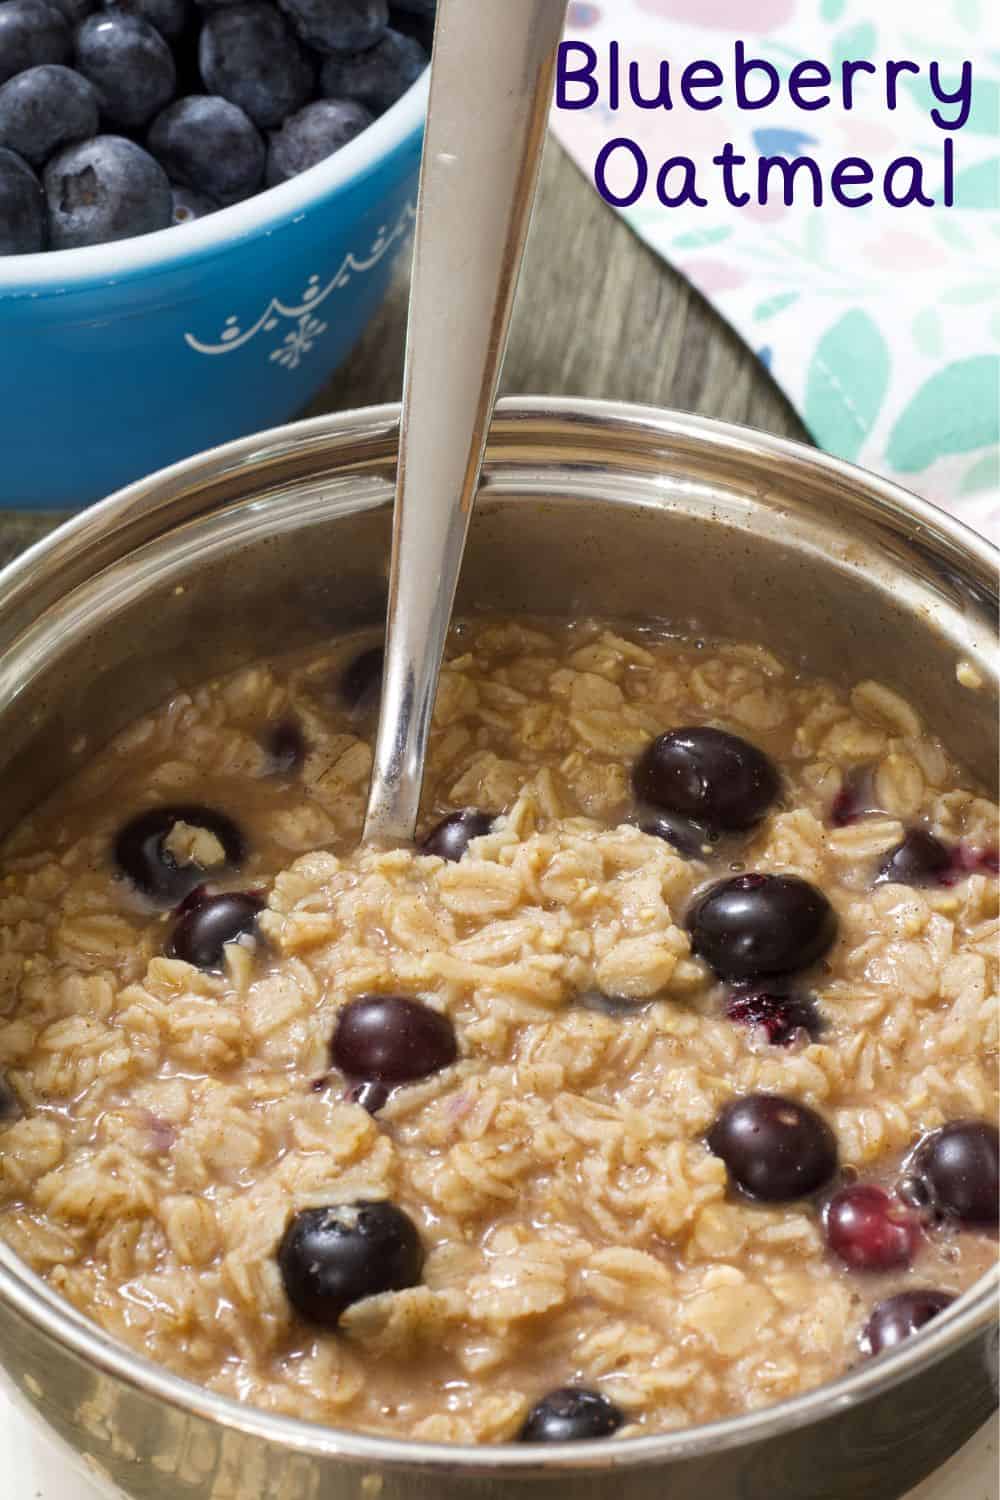 Easy Blueberry Oatmeal Recipe is a healthy, quick, high nutrient, low calorie breakfast. Perfect for weight loss or a healthy meal plan. #healthybreakfast #weightloss #blueberryoatmeal #easyrecipe via @mindyscookingobsession